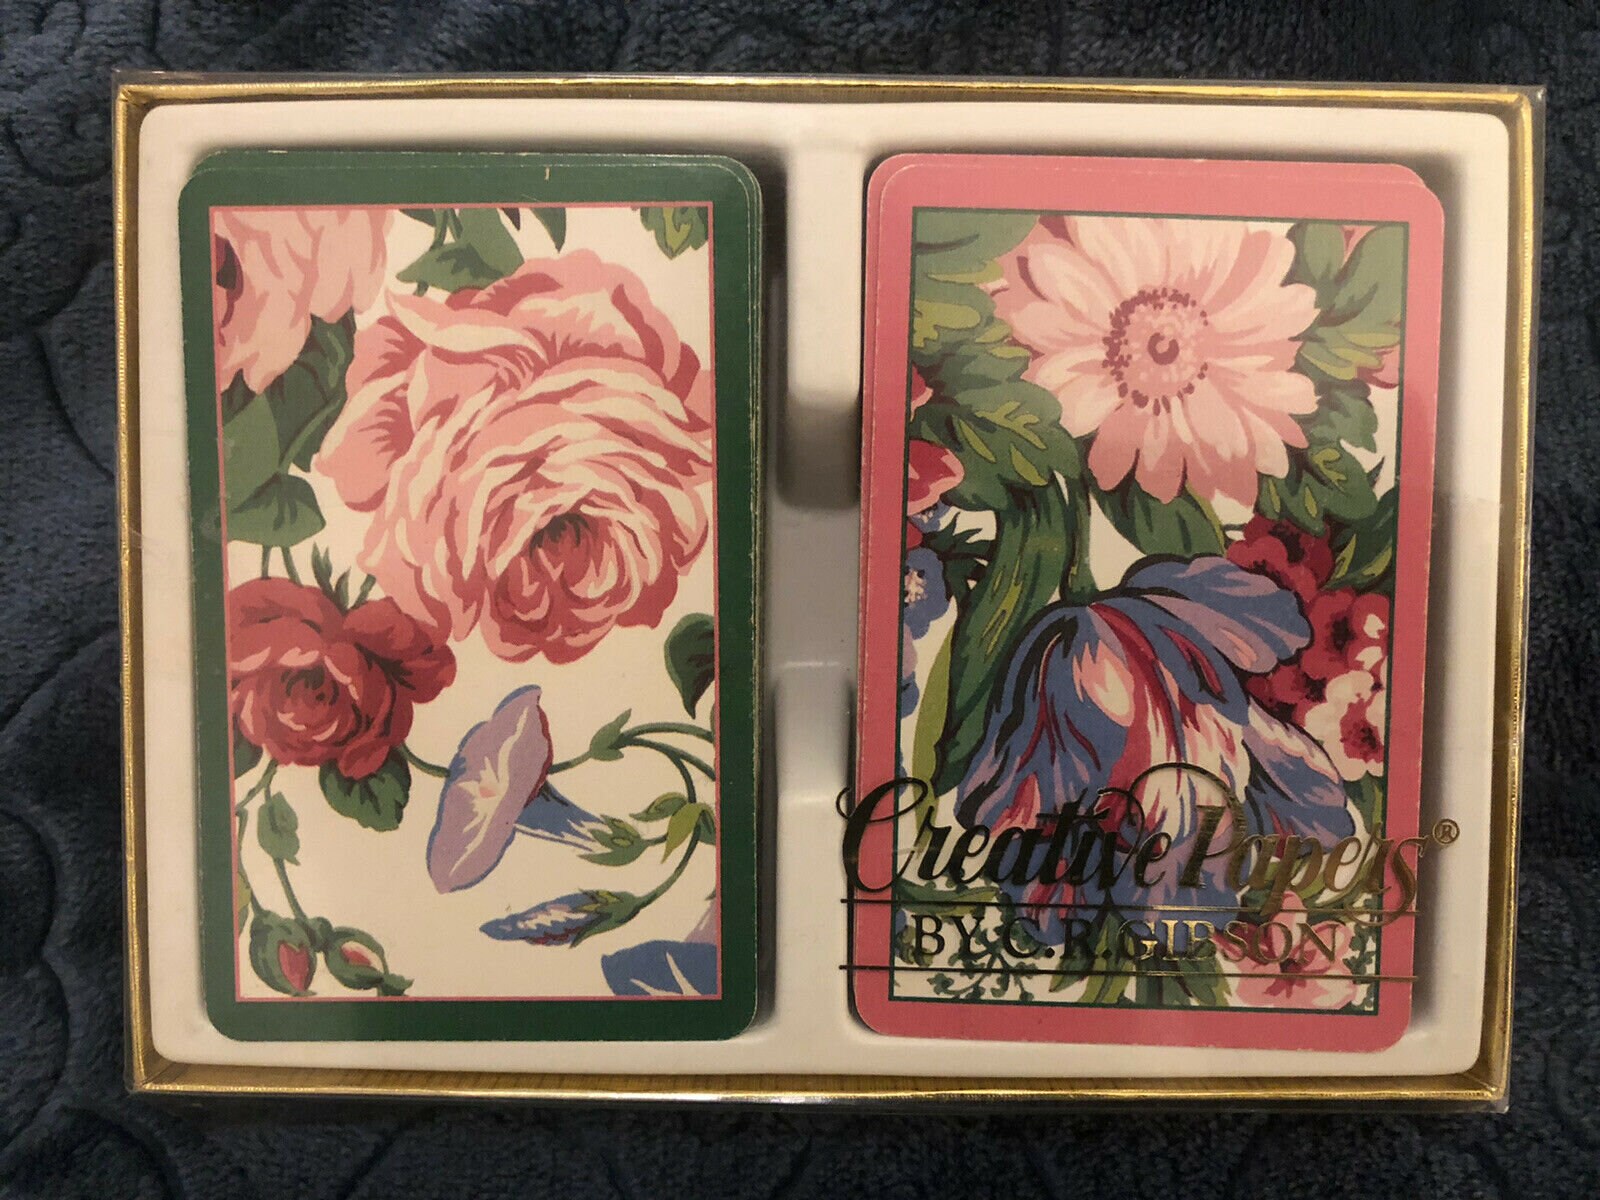 Vintage Graden Flowers Roses Wildflowers Engraving Painting by Redoute Flowers Roses Playing Cards Poker Deck 54 Cards All Different 